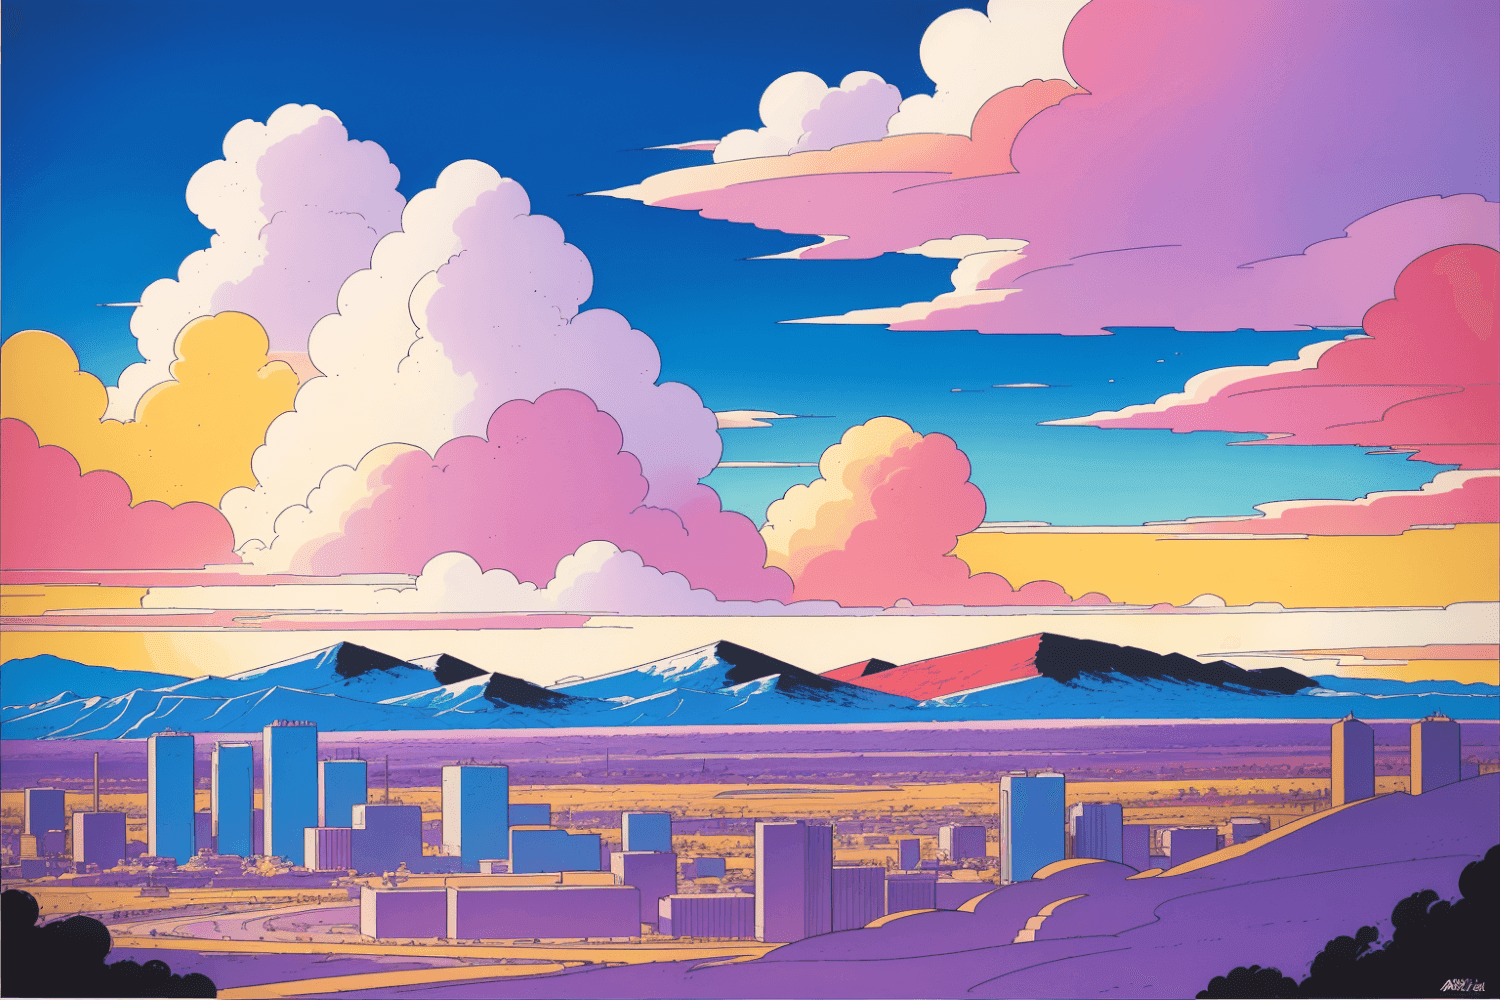 A comic style landscape, clouds and distant city